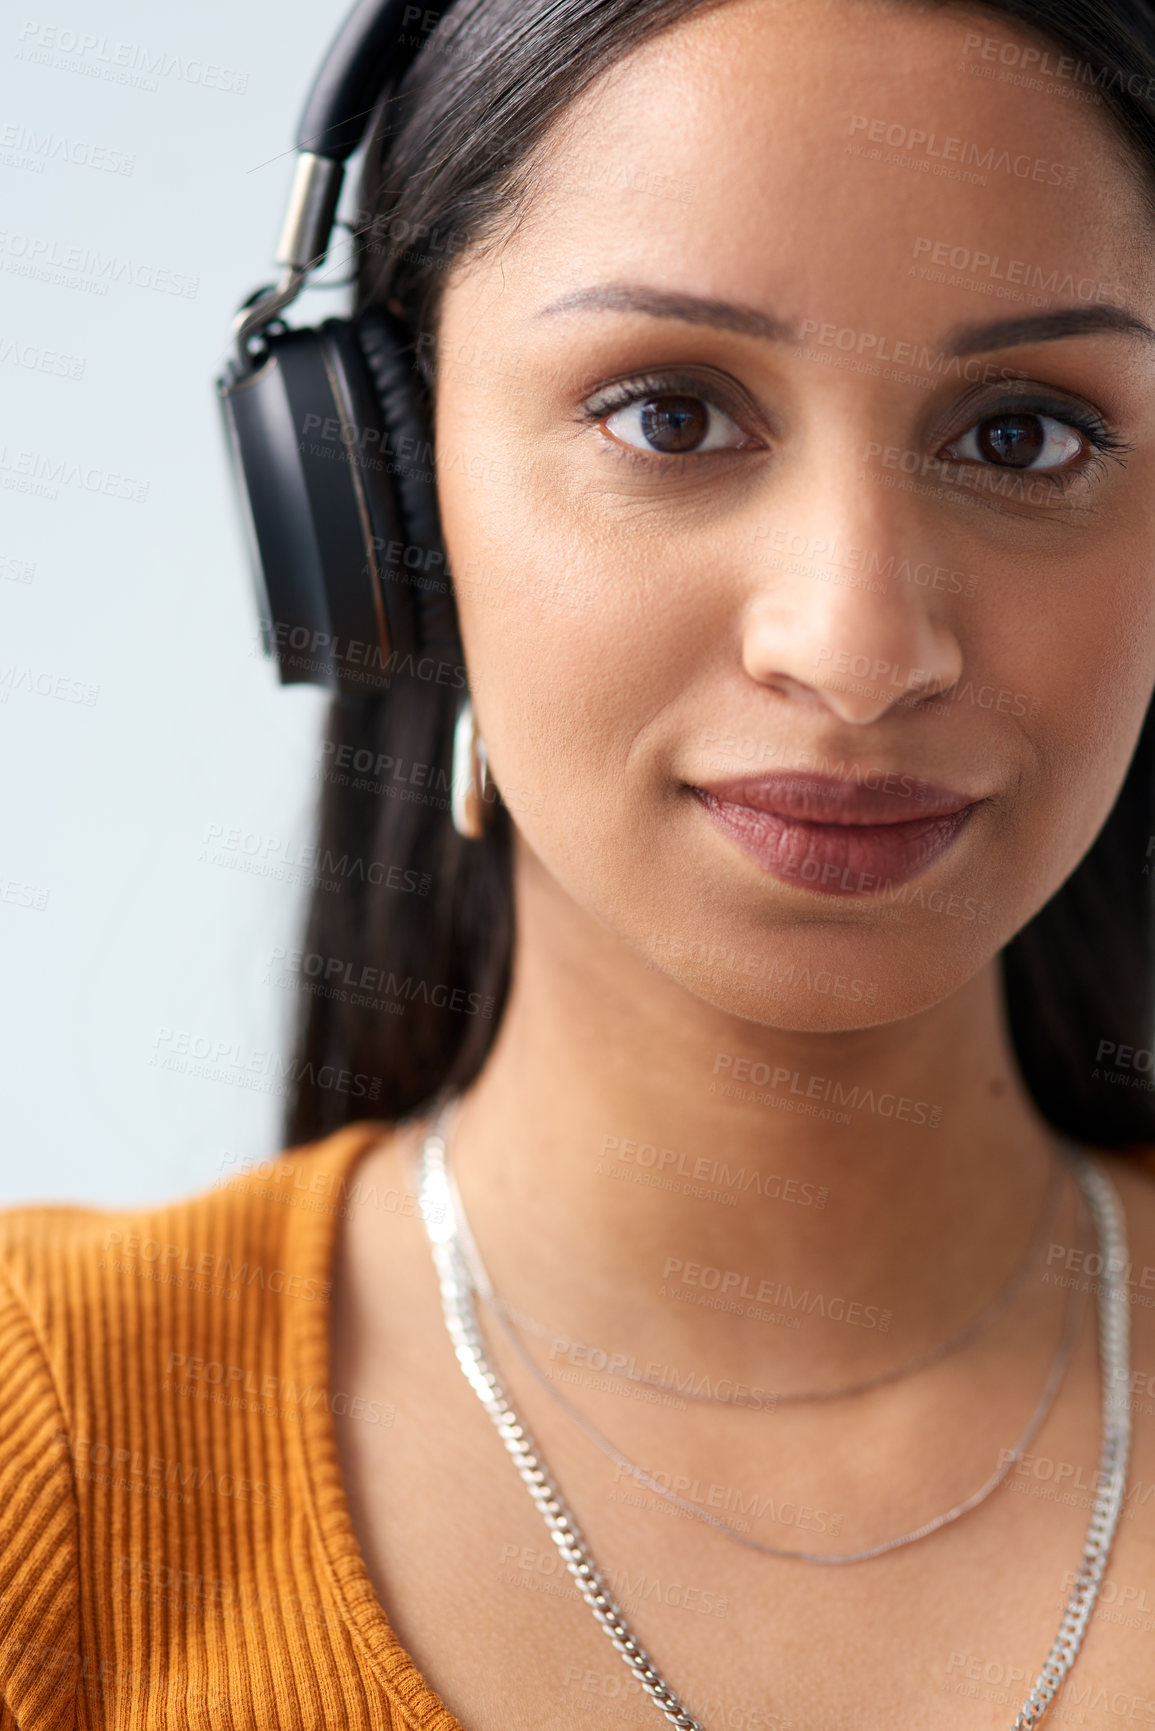 Buy stock photo Cropped portrait of an attractive young woman wearing headphones in studio against a grey background